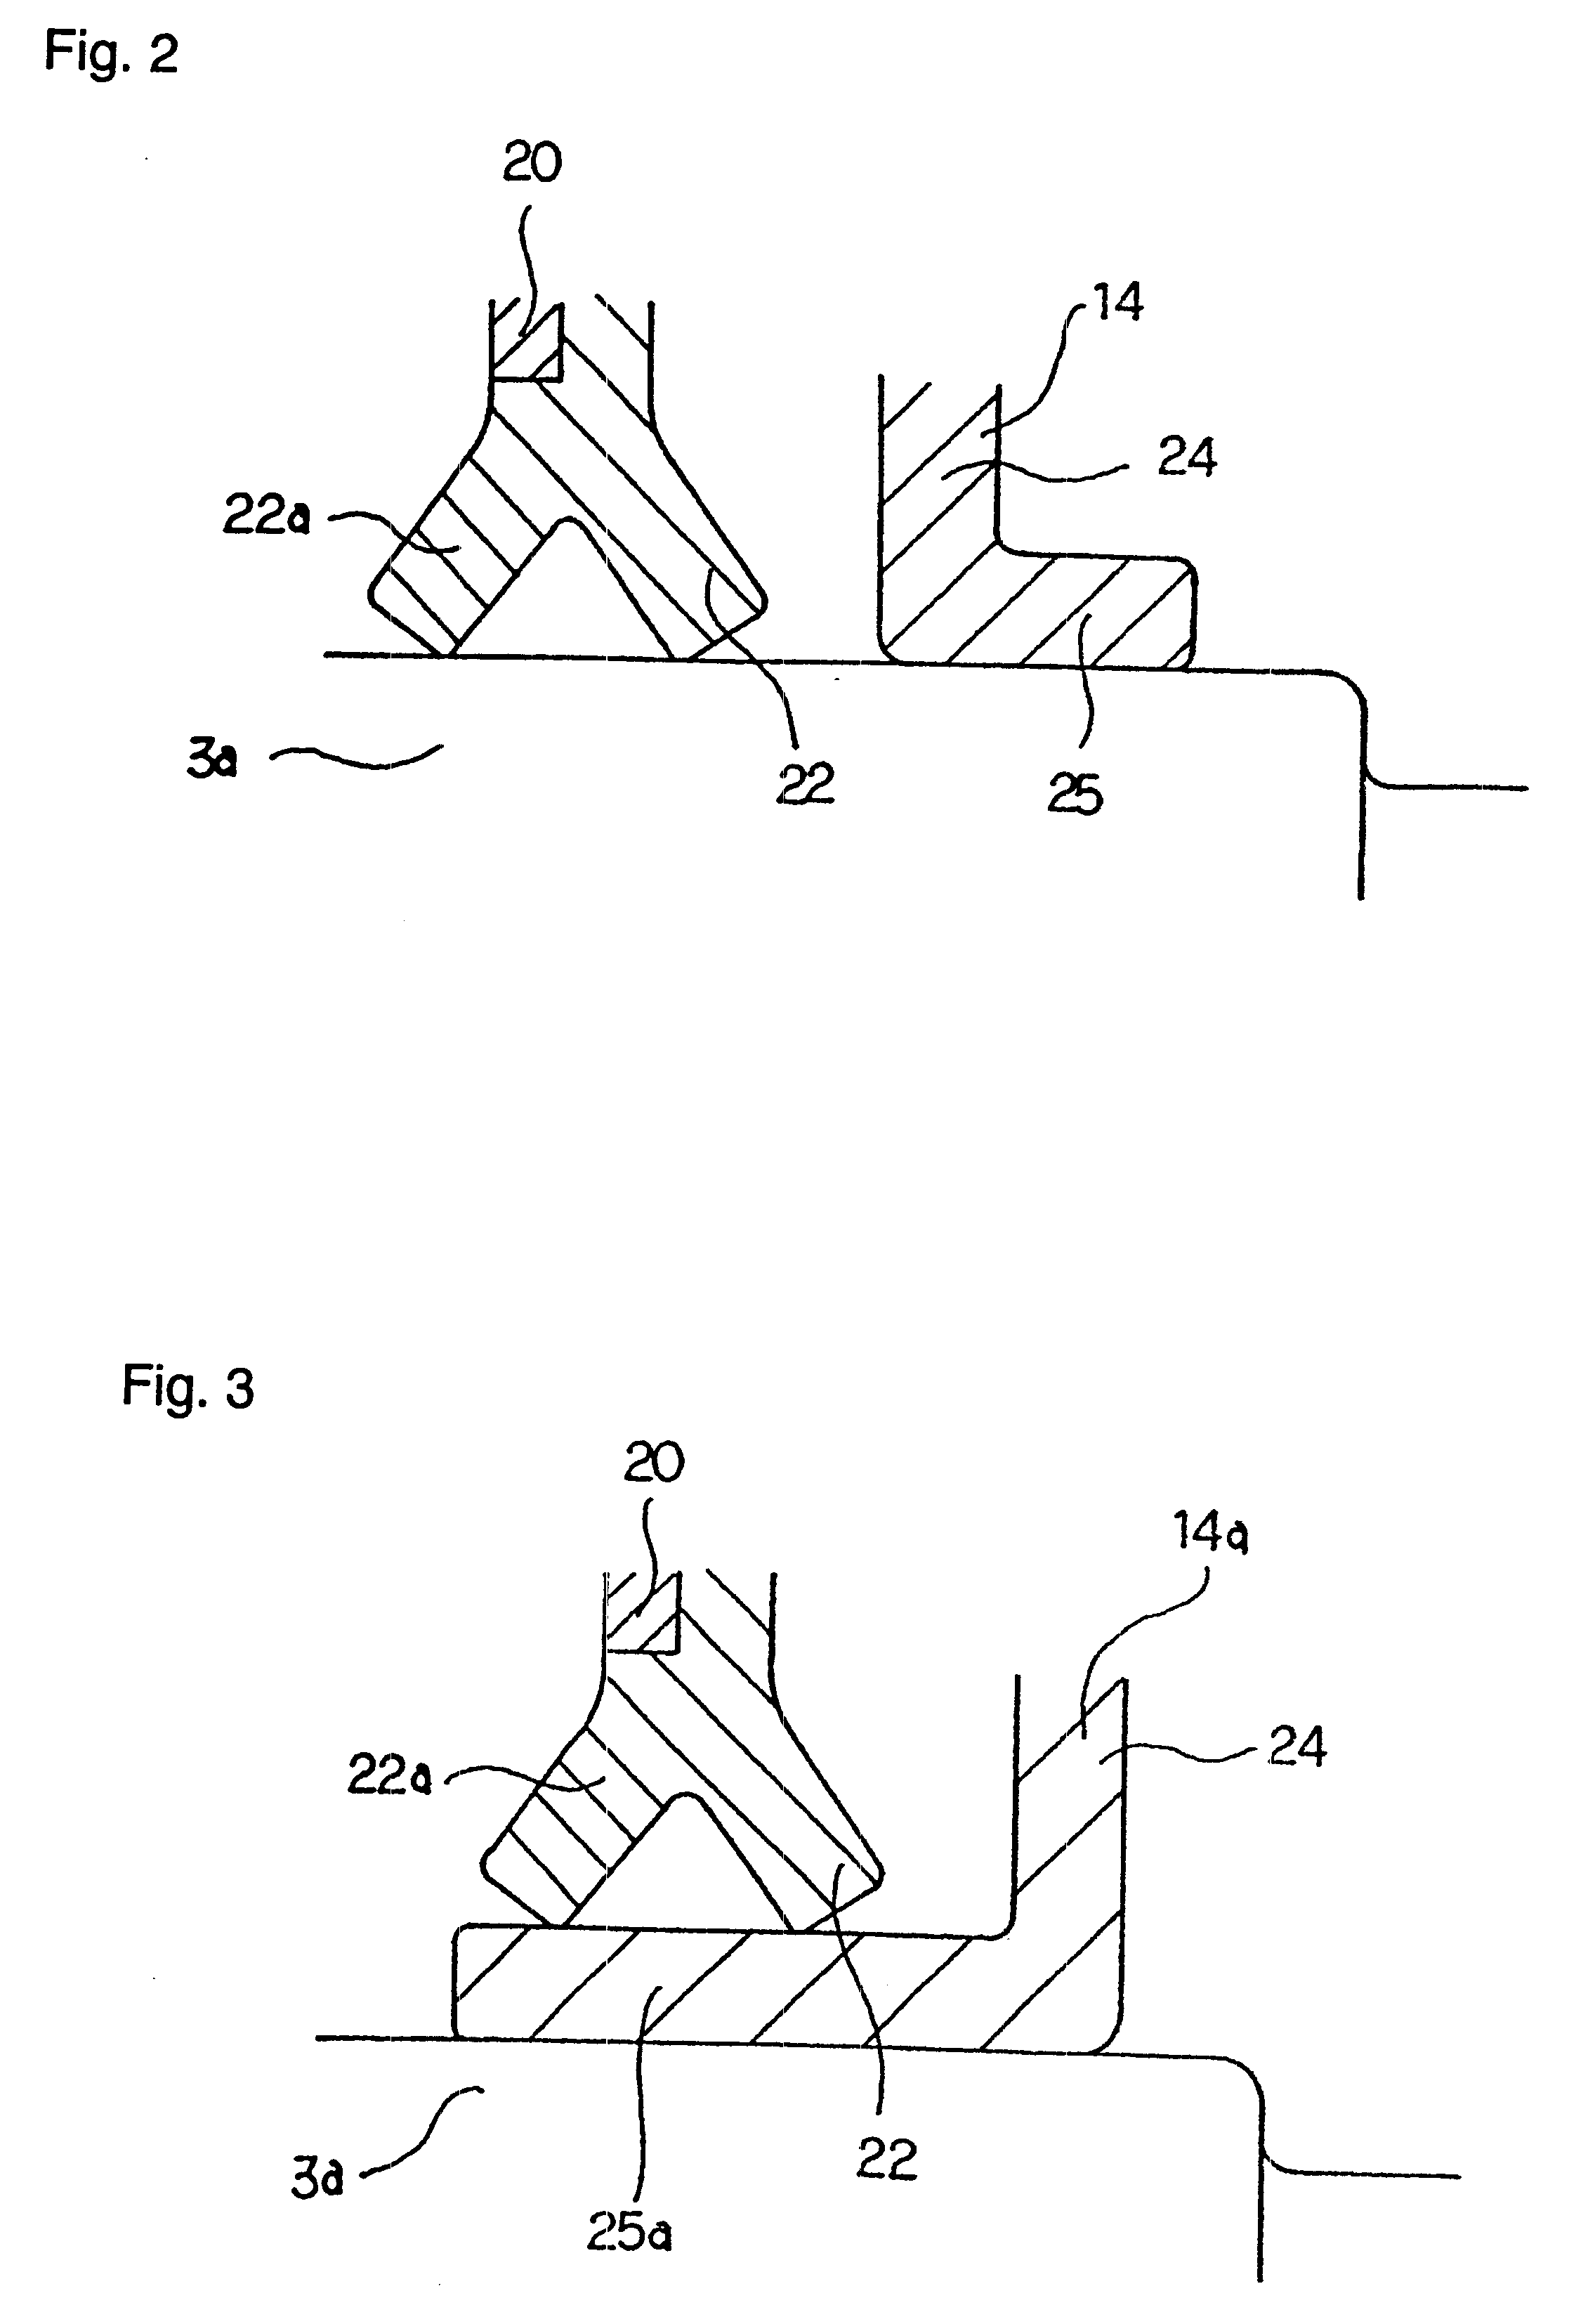 Seal apparatus for a water pump, rotation-support apparatus for a water pump, and a water pump